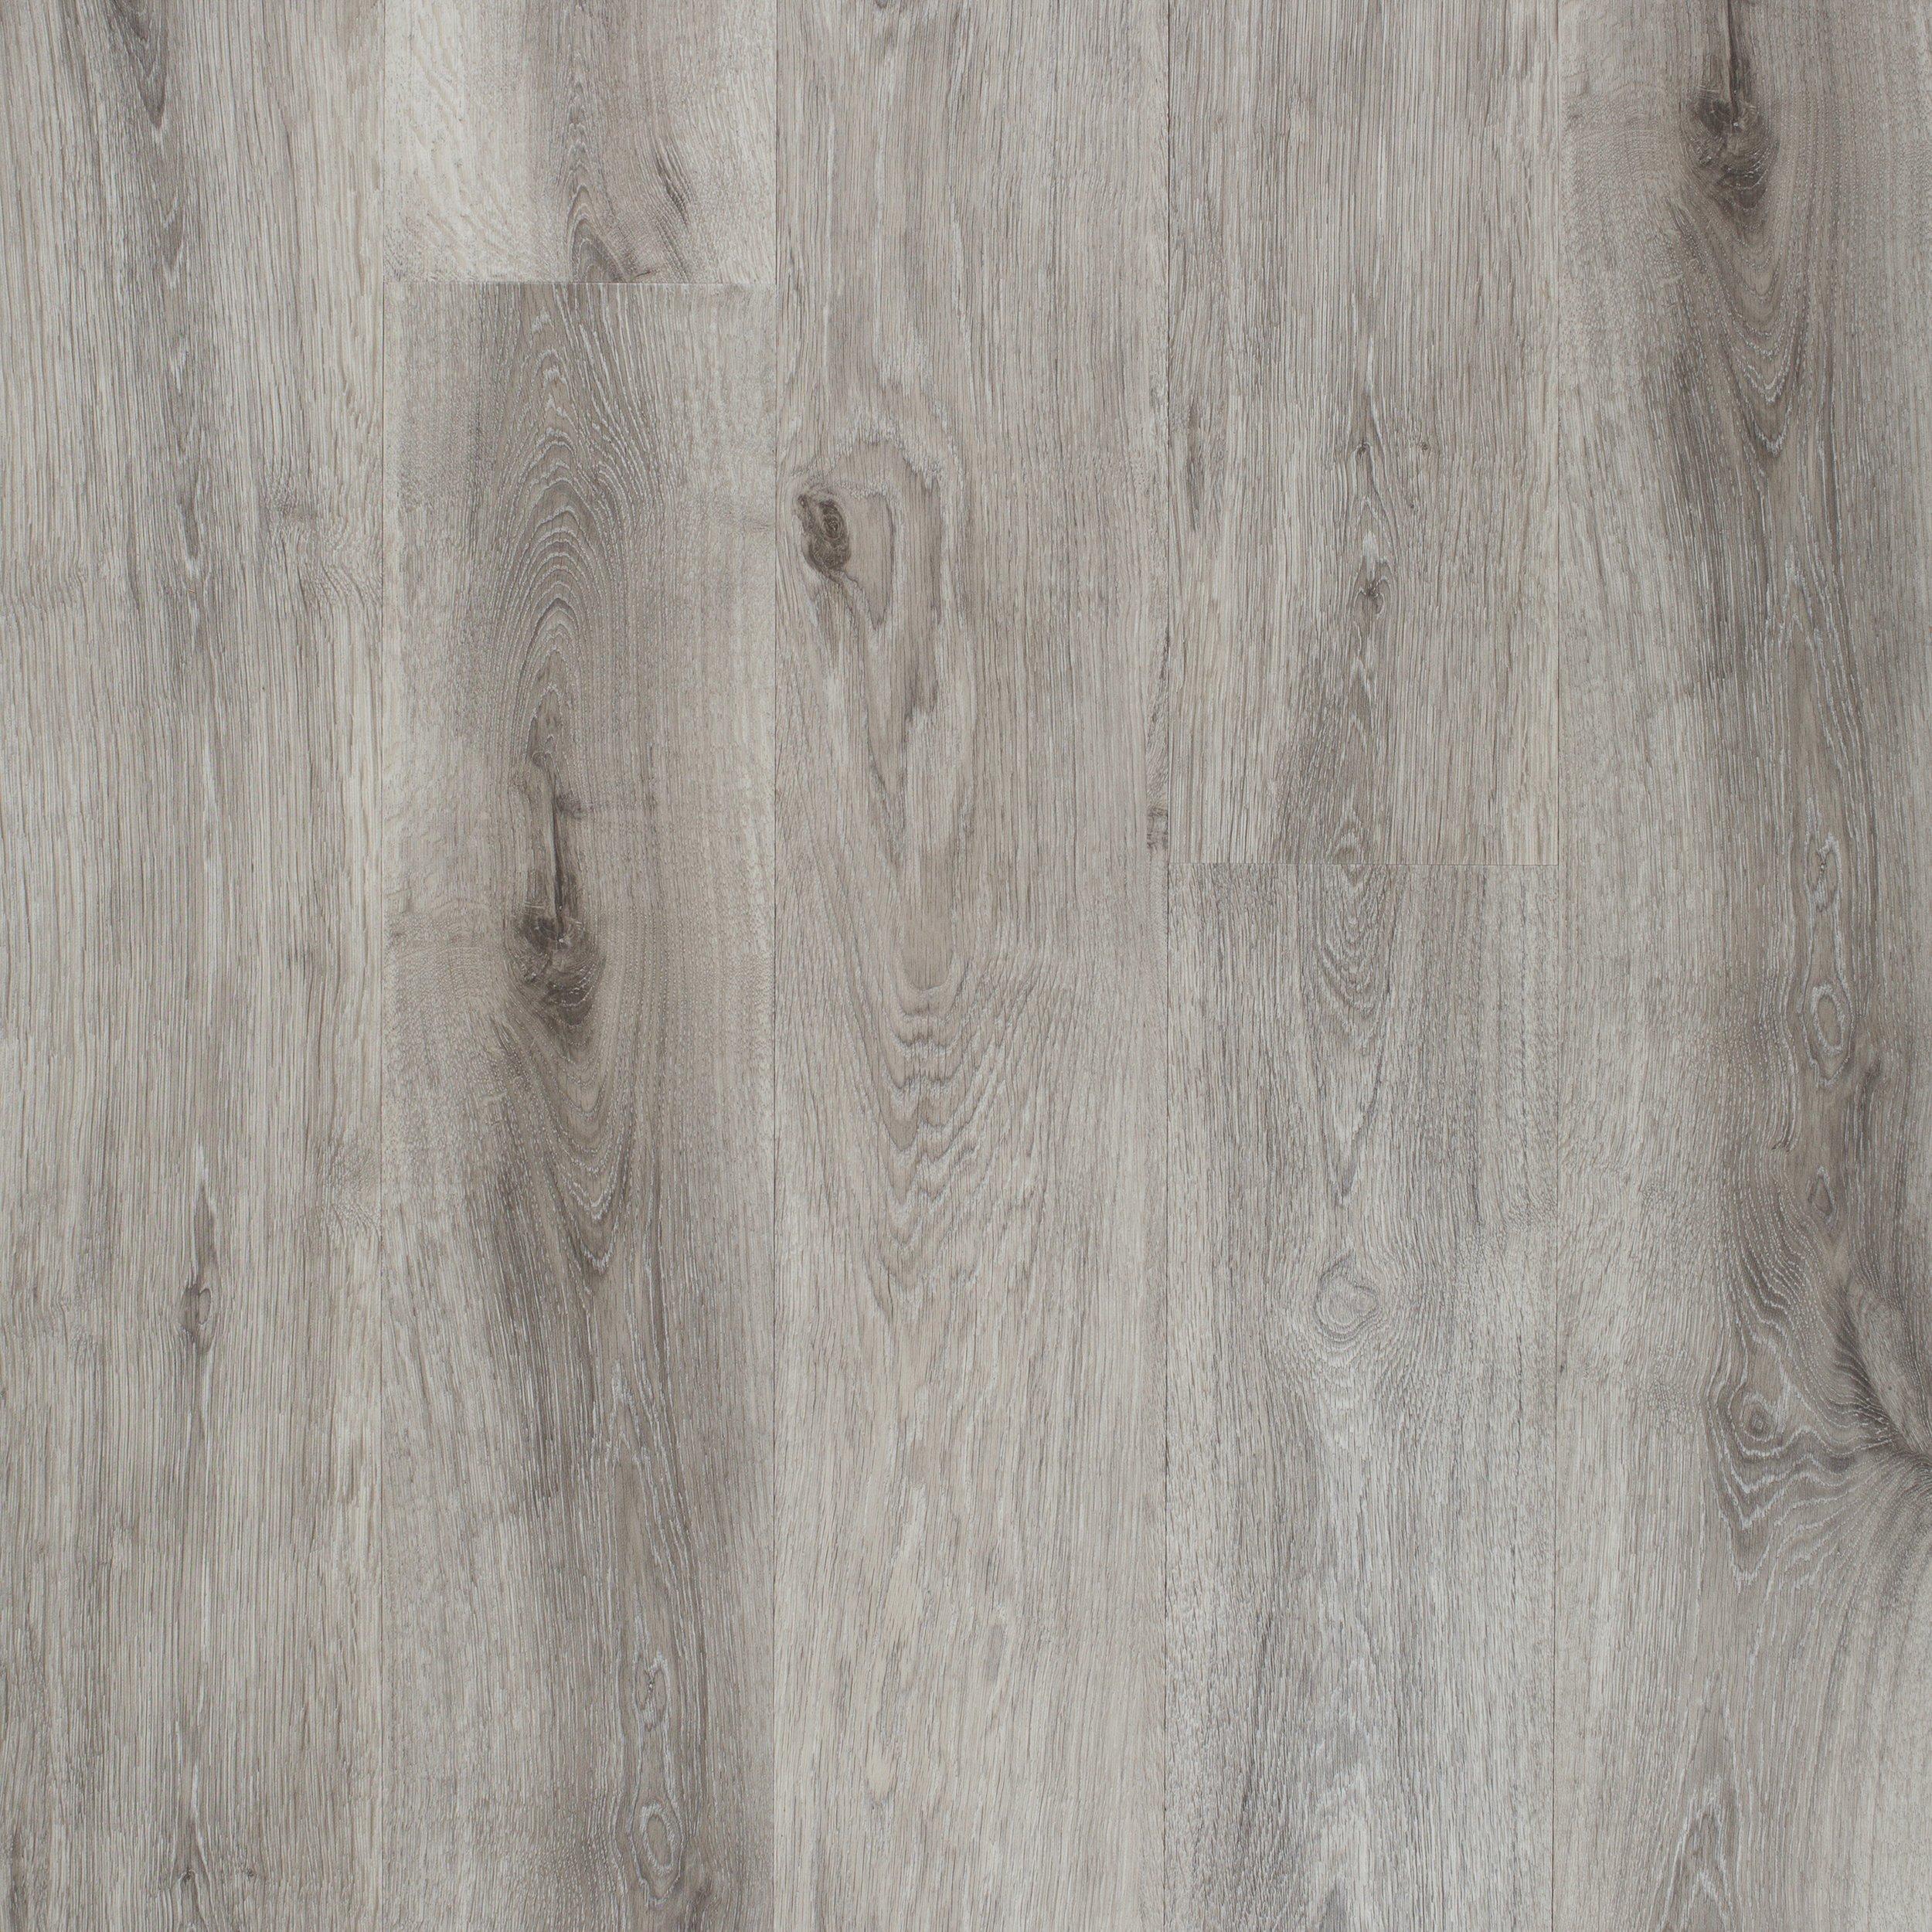 White Pewter Rigid Core Luxury Vinyl, How To Cut Vinyl Plank Flooring With Cork Backing